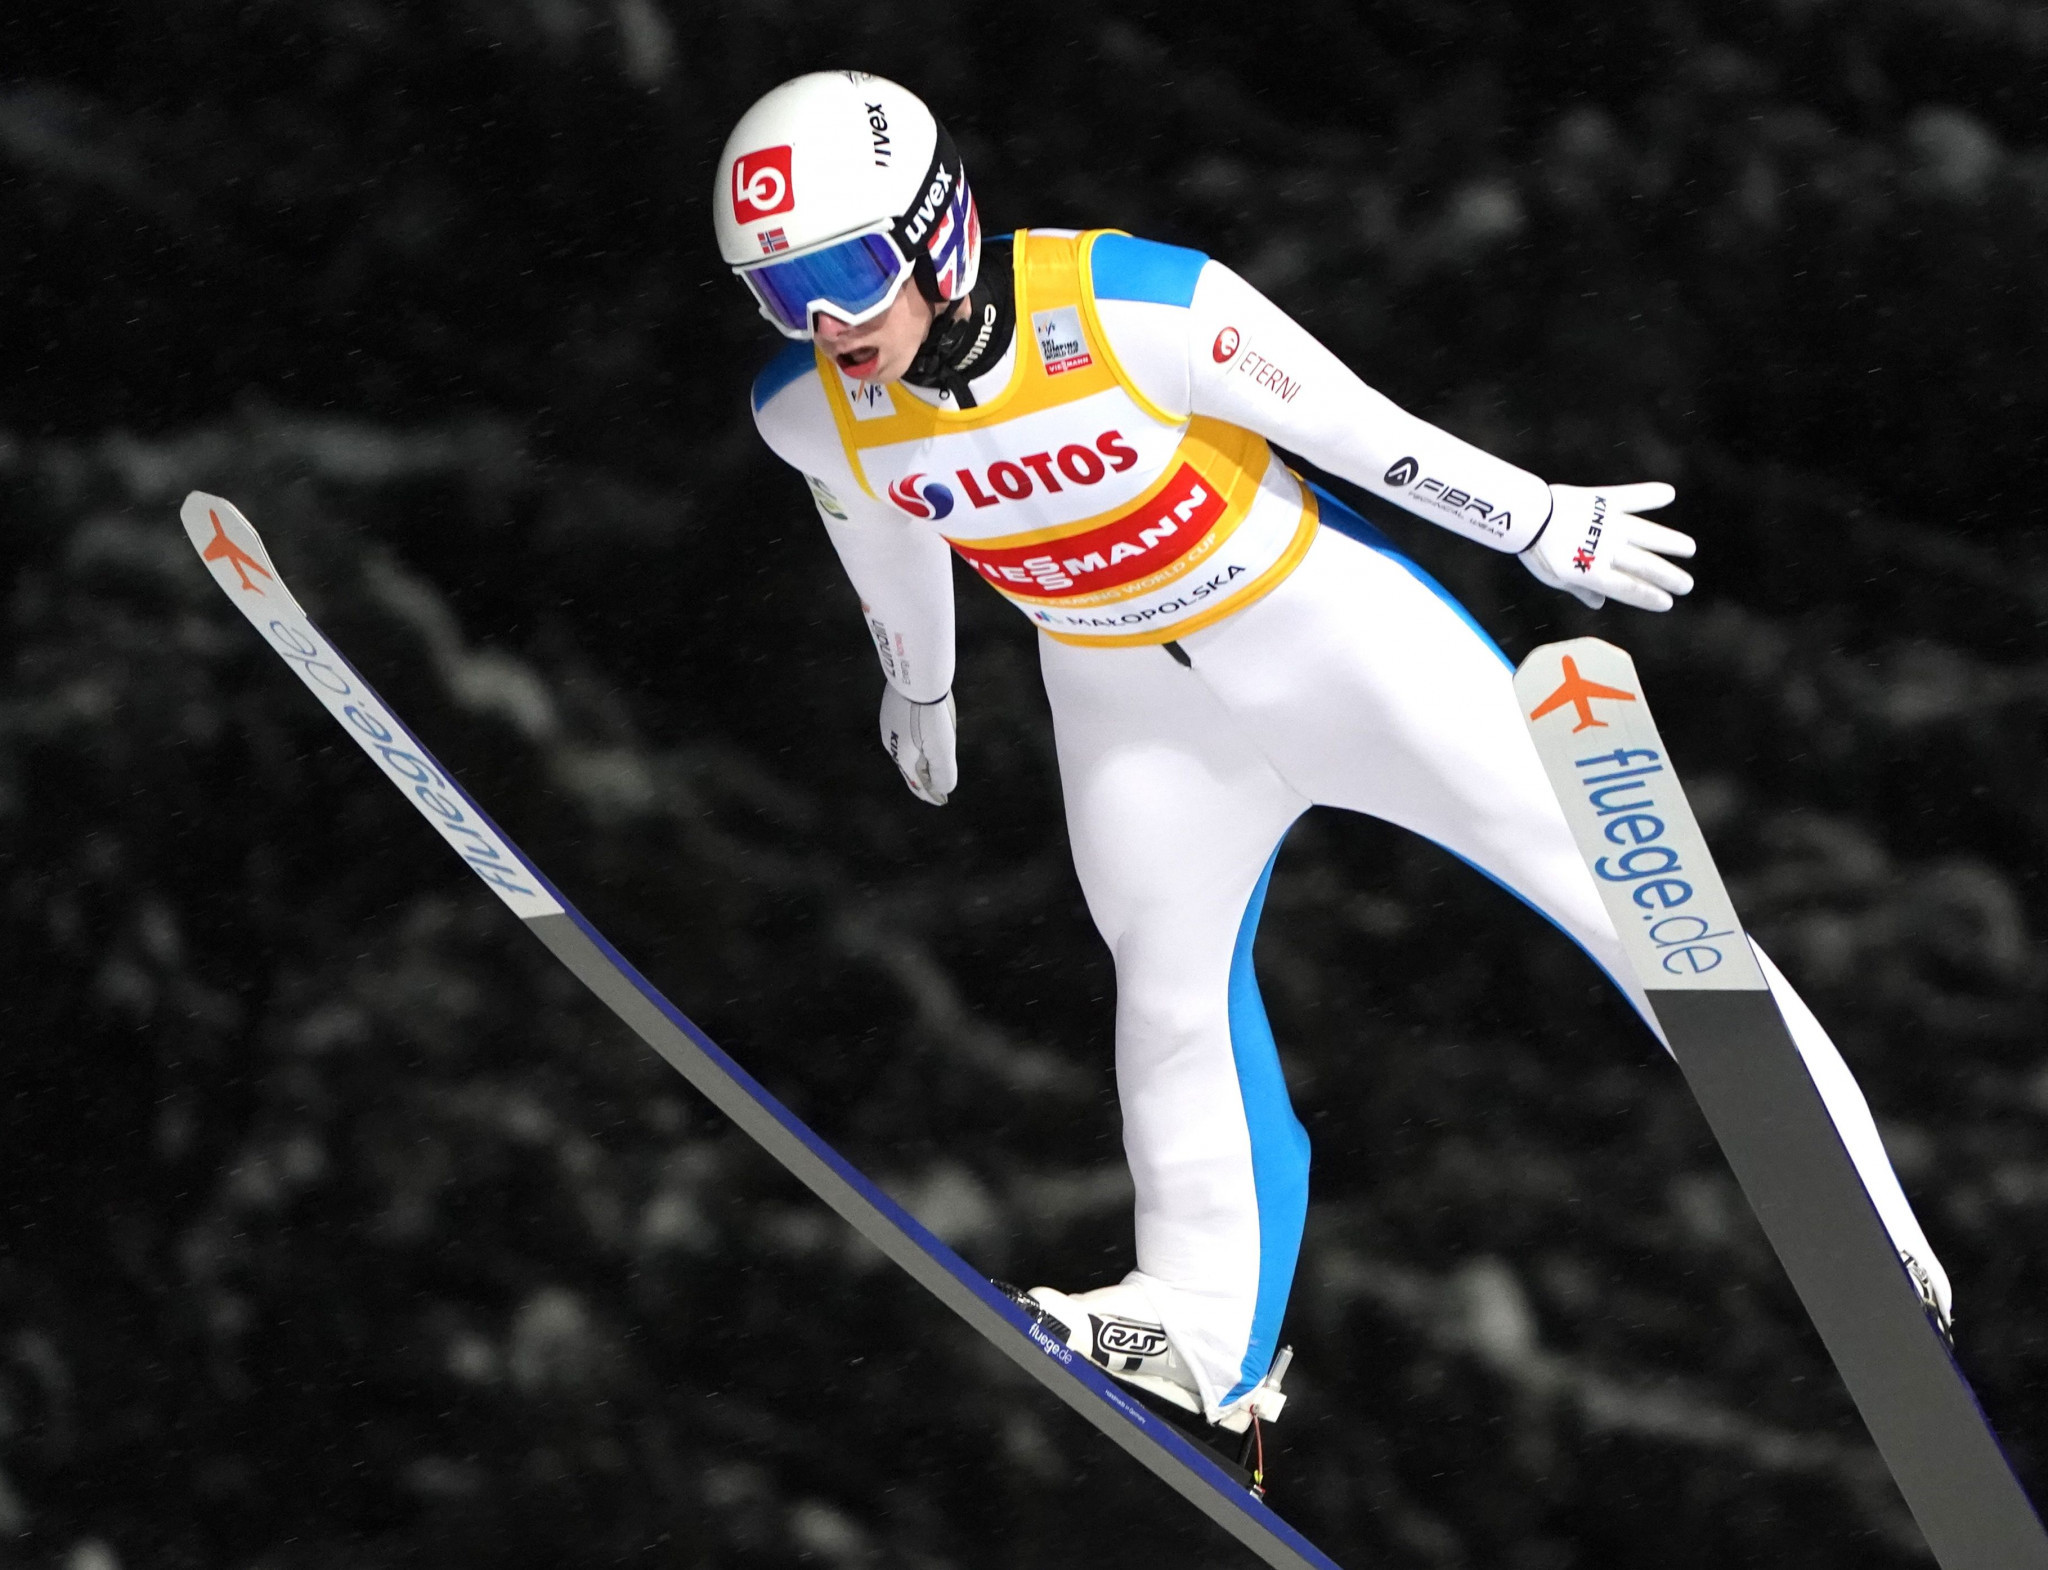 Halvor Egner Granerud will aim to extend his FIS Ski Jumping World Cup lead in Lahti ©Getty Images